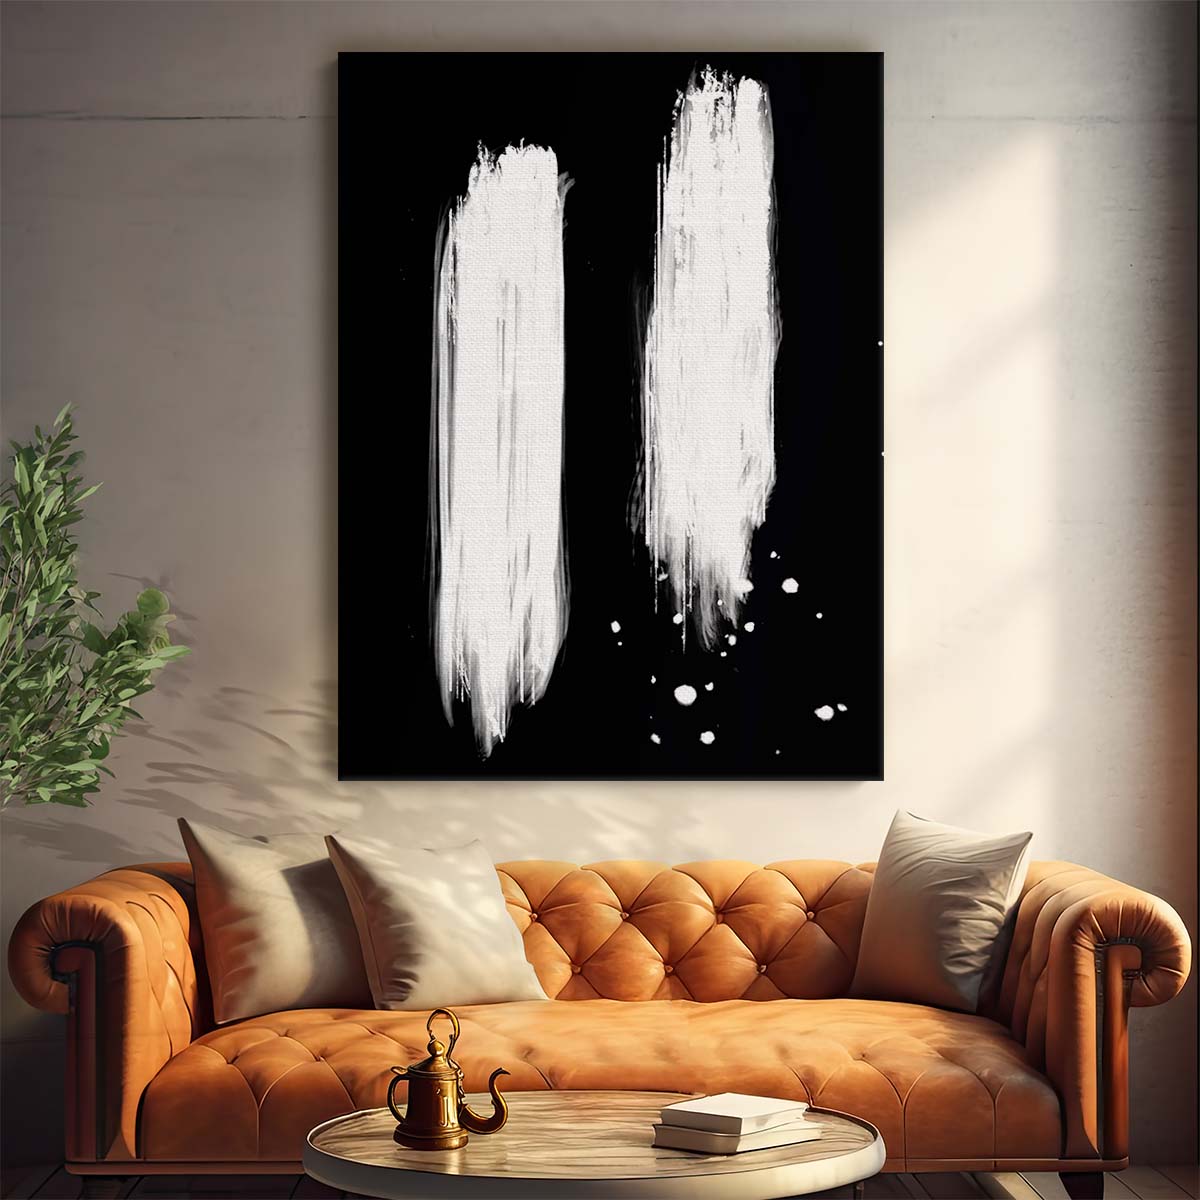 Monochrome Geometric Abstract Illustration Painting with Brush Strokes by Luxuriance Designs, made in USA